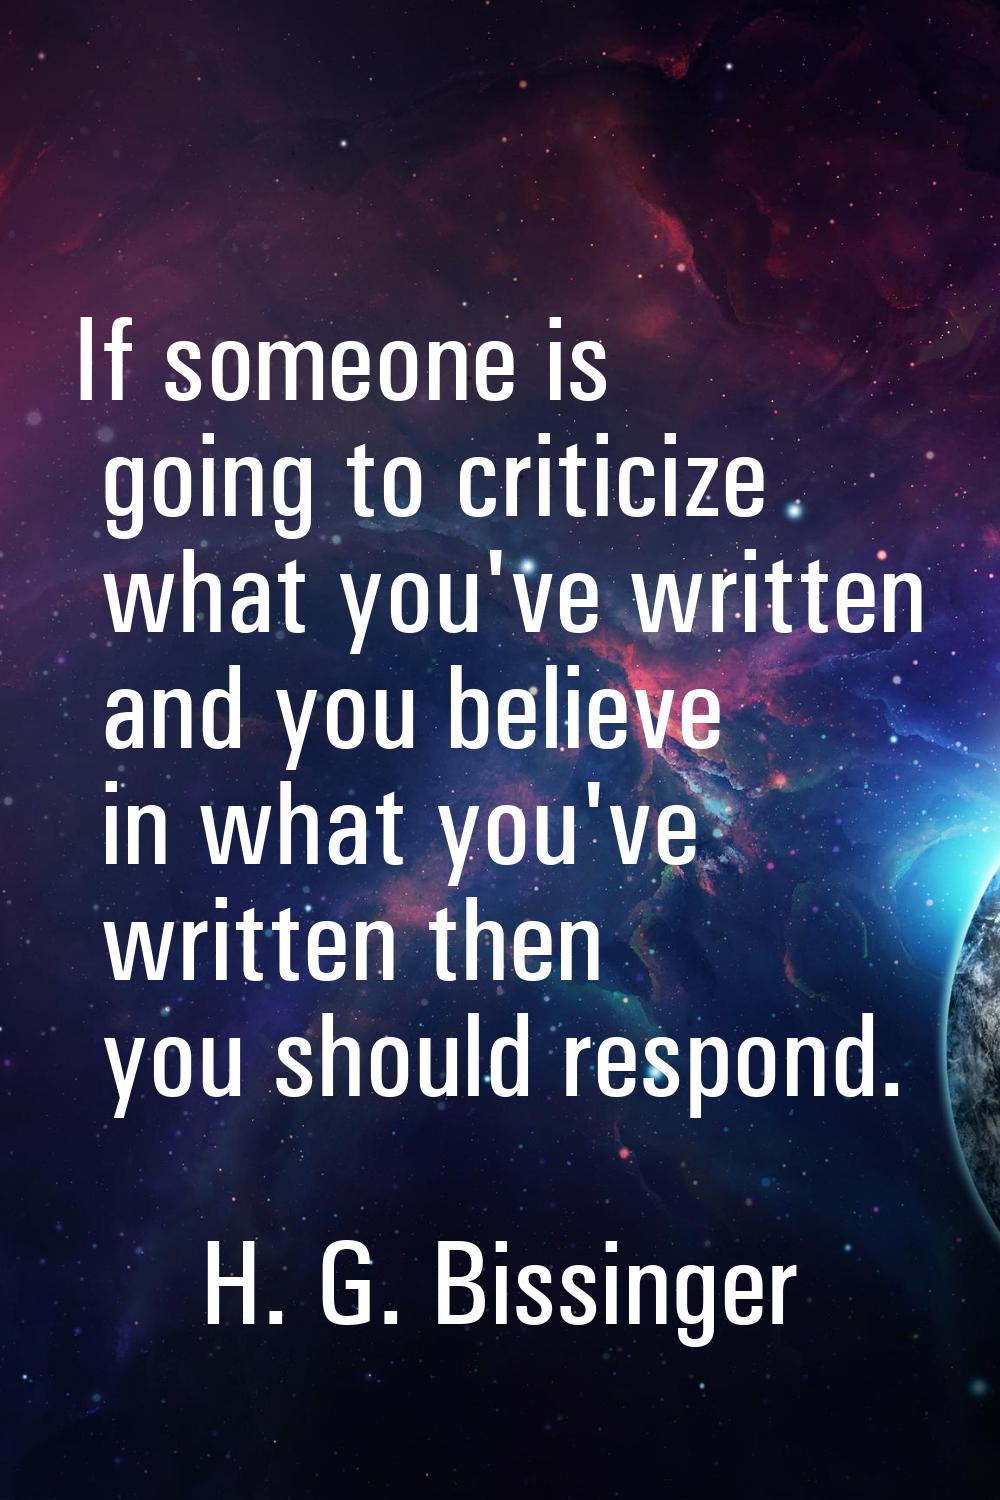 If someone is going to criticize what you've written and you believe in what you've written then yo